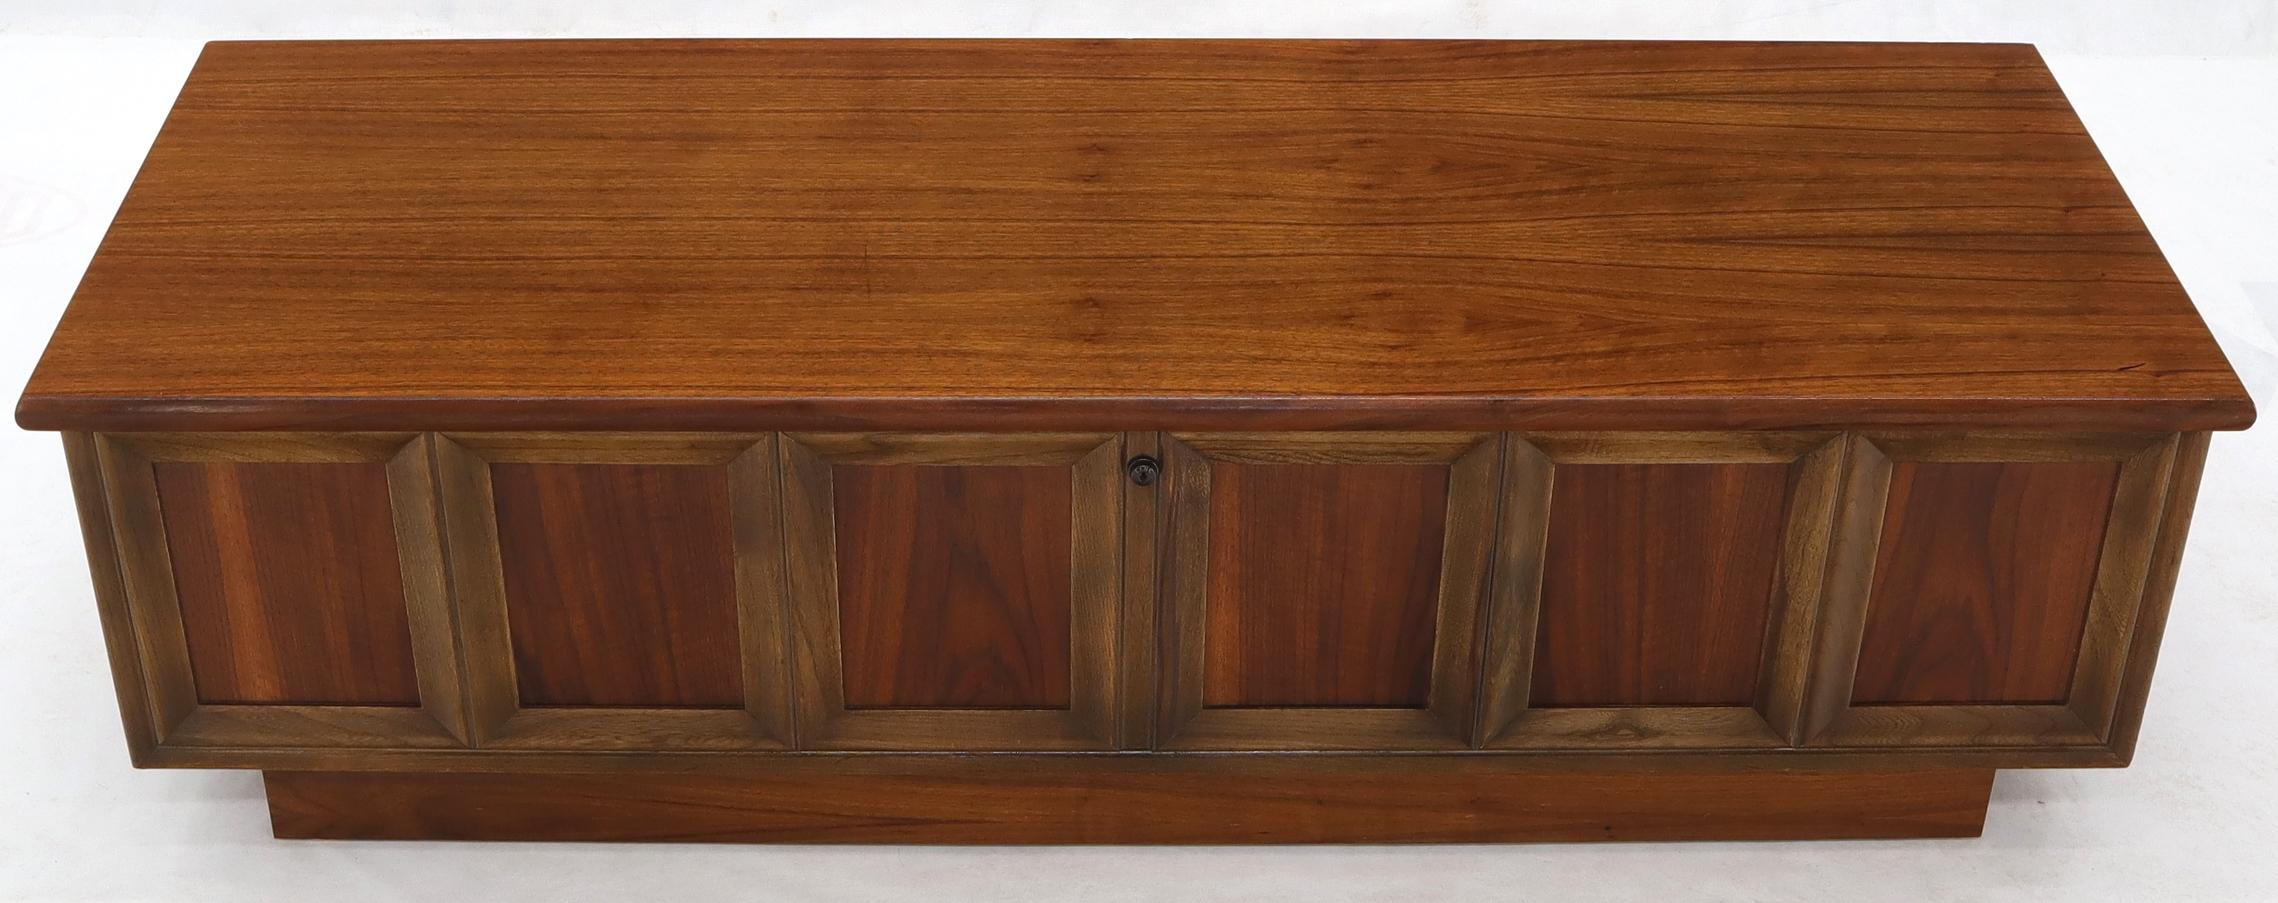 American Walnut Cedar Lined Mid-Century Modern Hope Chest by Lane For Sale